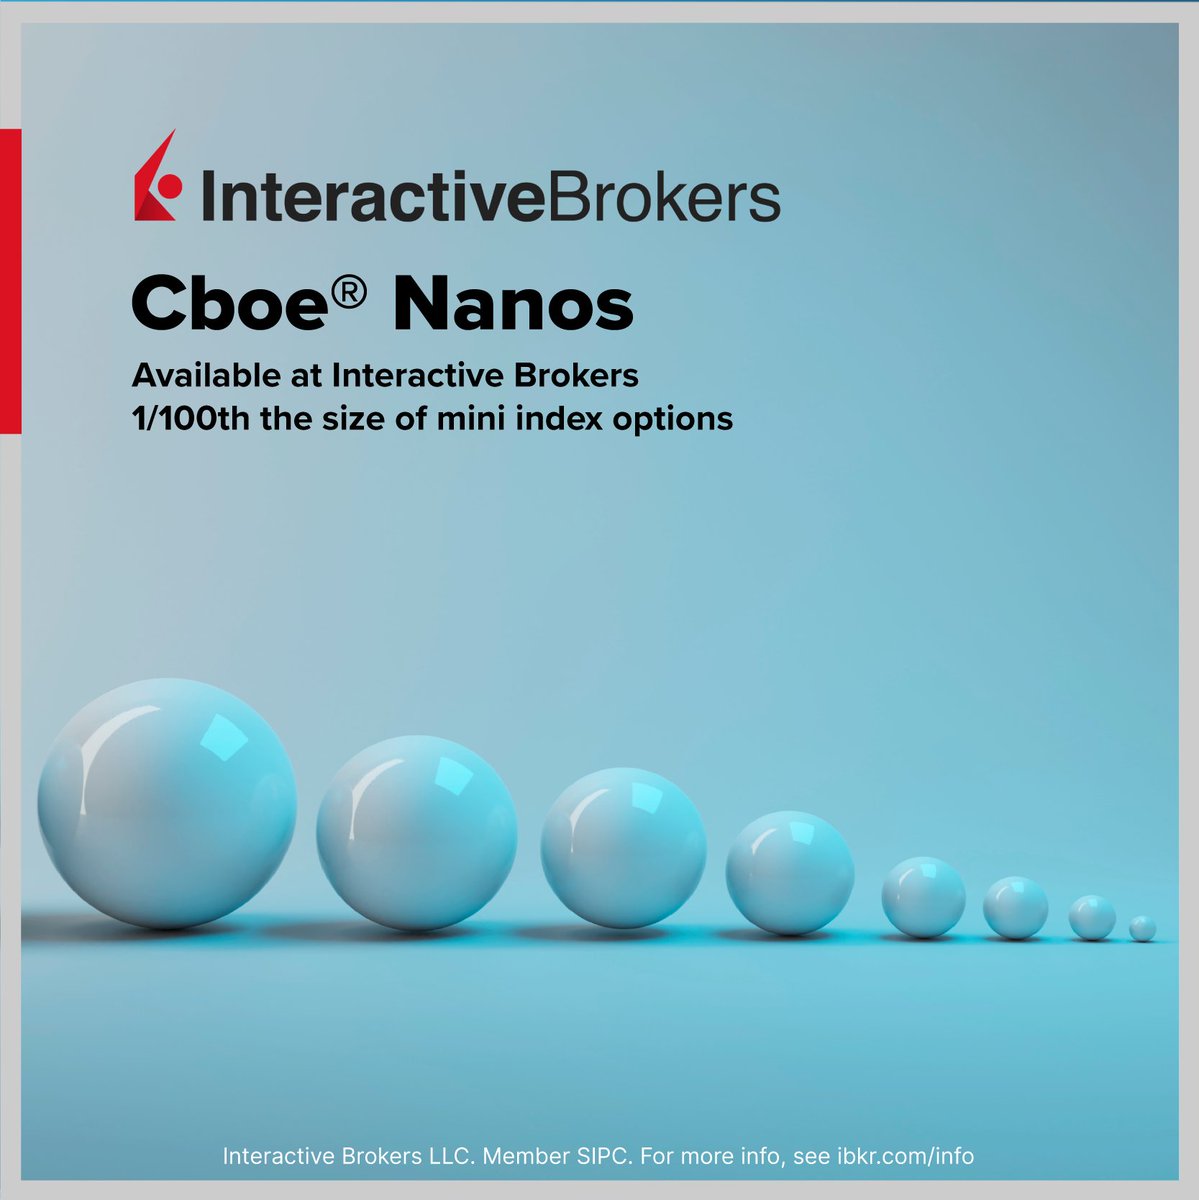 Trade #CBOE Nanos on IBKR at 1/100th the size of mini index options. Choose the contract that's best for you with #IBKR. Learn more: ibkr.com/cboenanot #IBKR #CBOE #SPX #Options #Trading